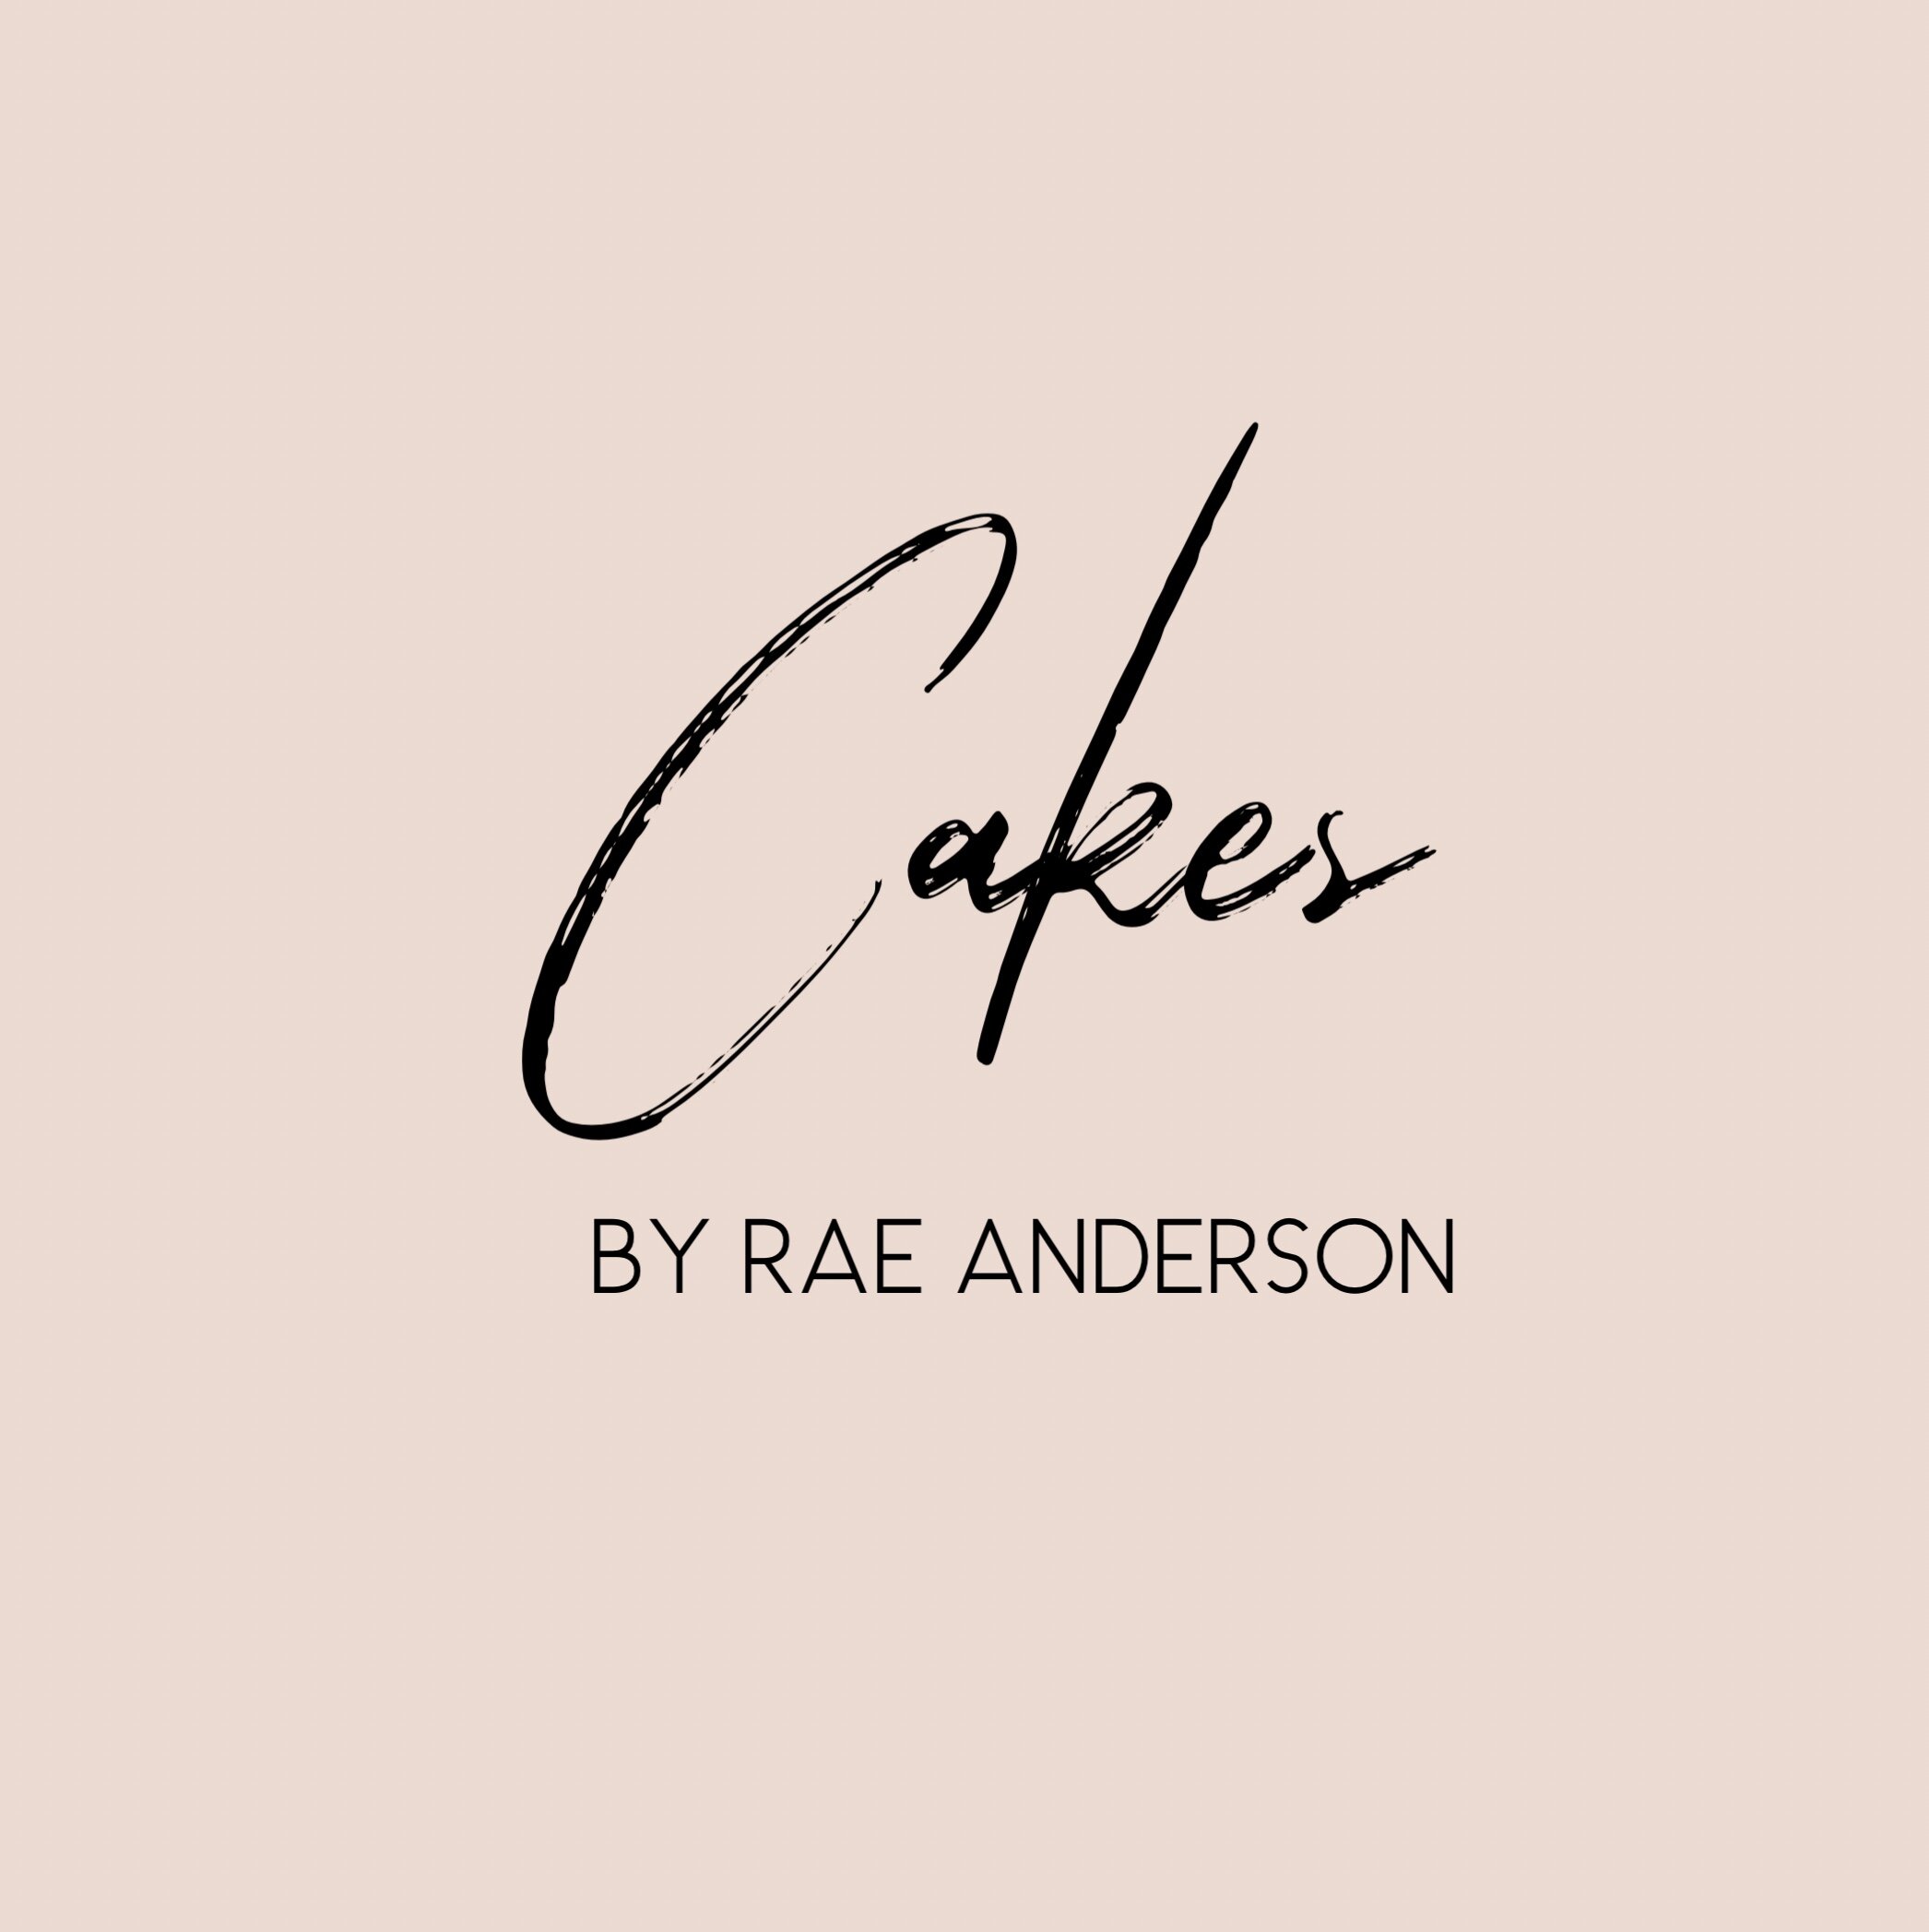 Cakes by Rae Anderson